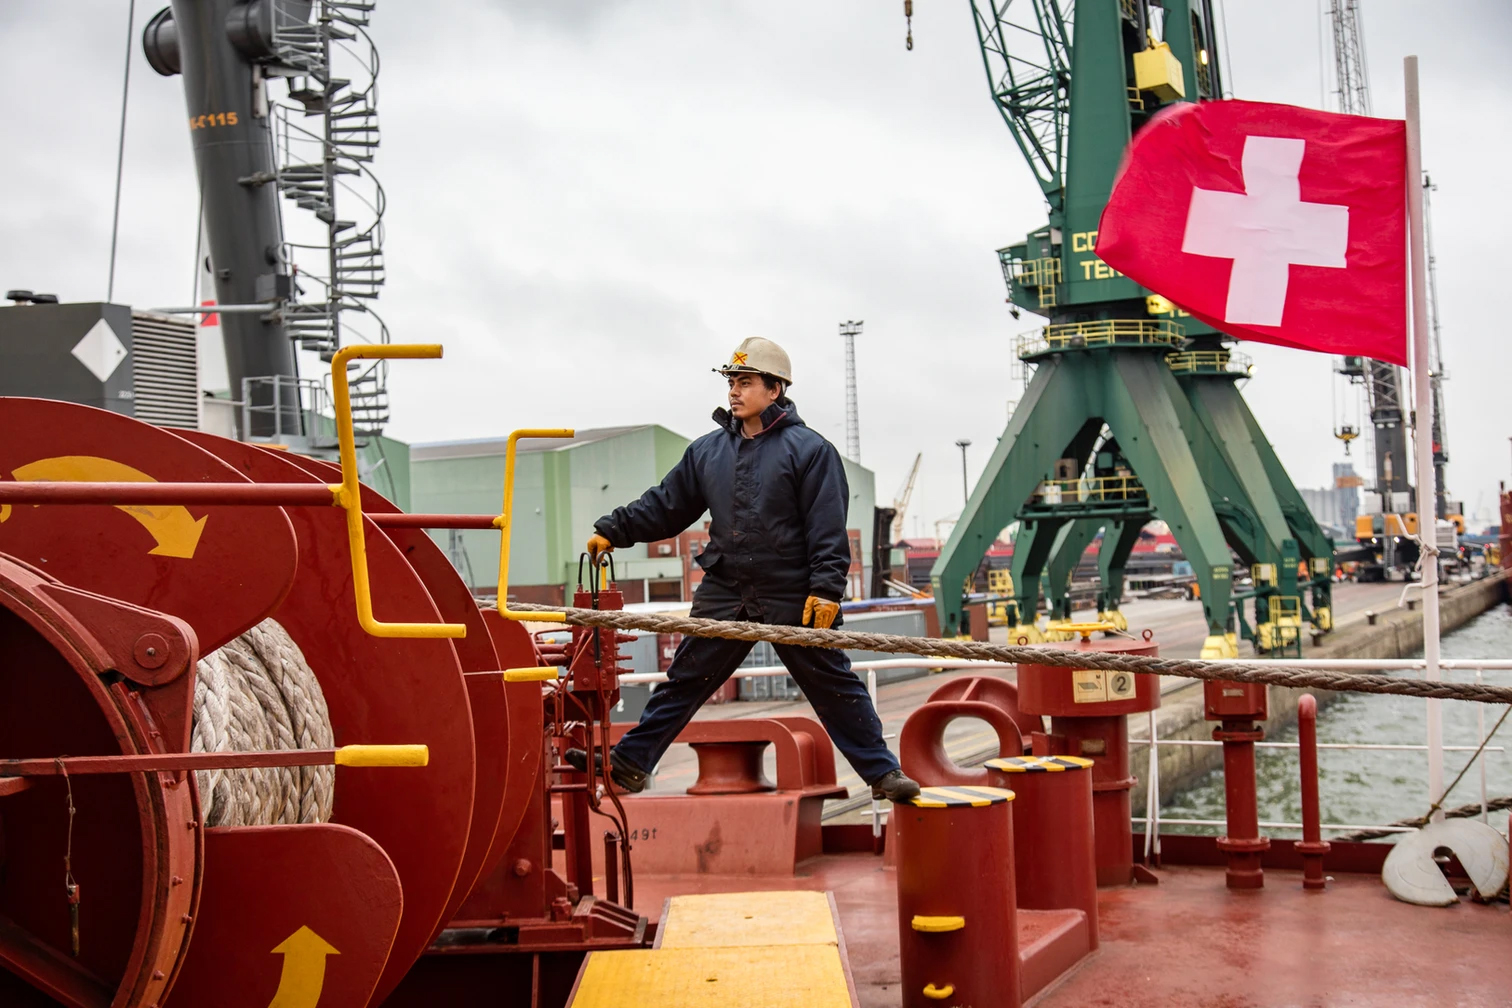 A sailor on a swiss cargo vessel holding a swiss flag